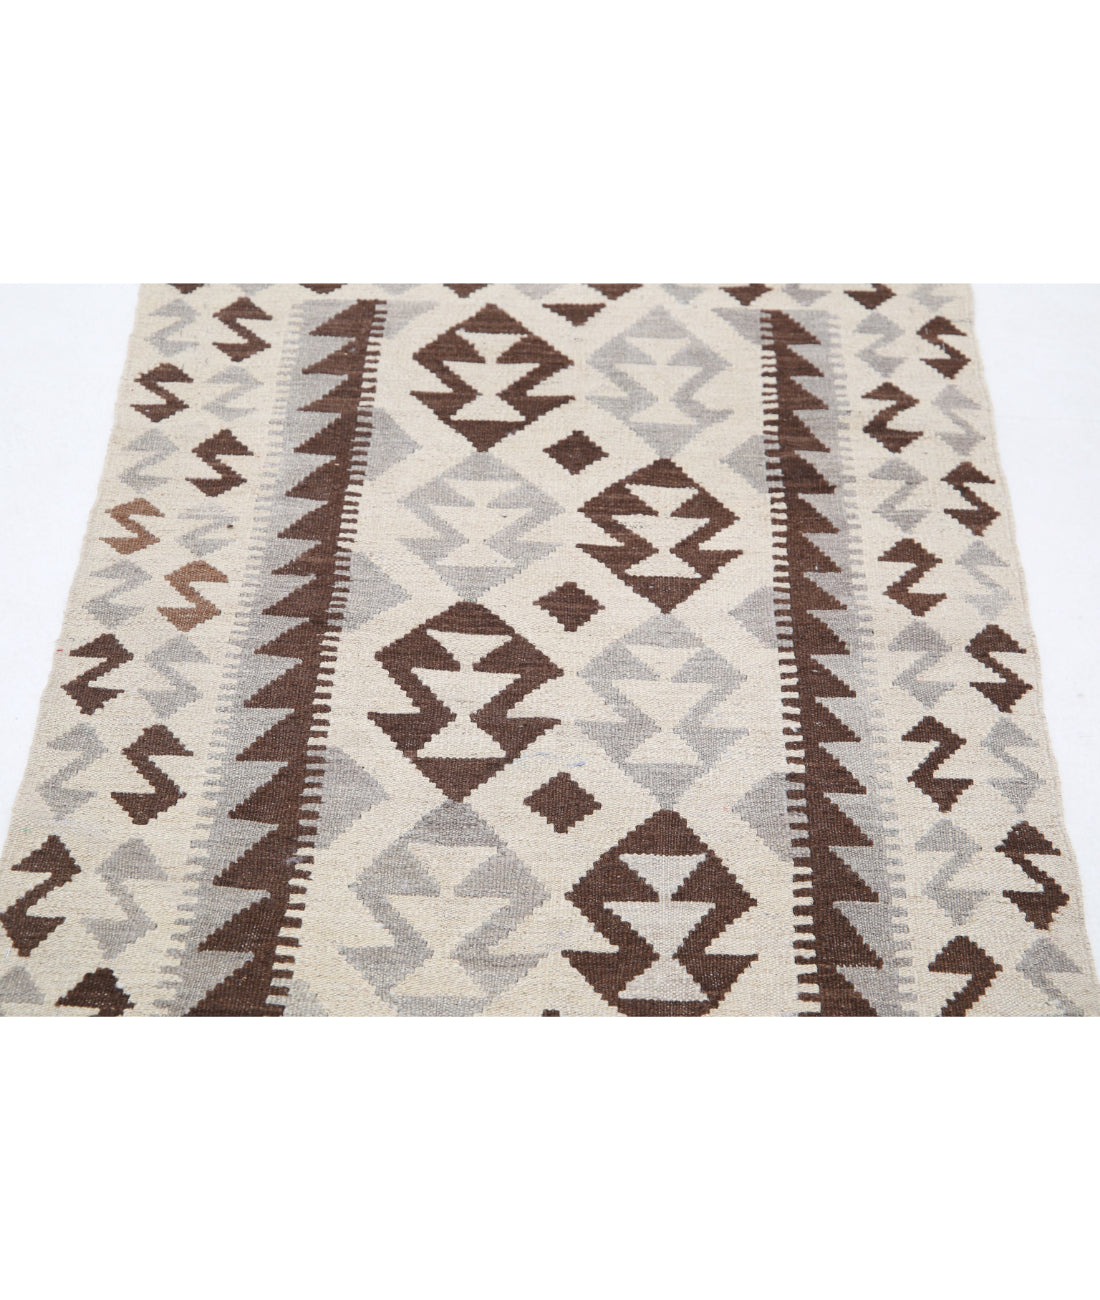 Hand Knotted Natural Kilim Wool Kilim Rug - 2'9'' x 3'10'' 2'9'' x 3'10'' (83 X 115) / Ivory / Taupe